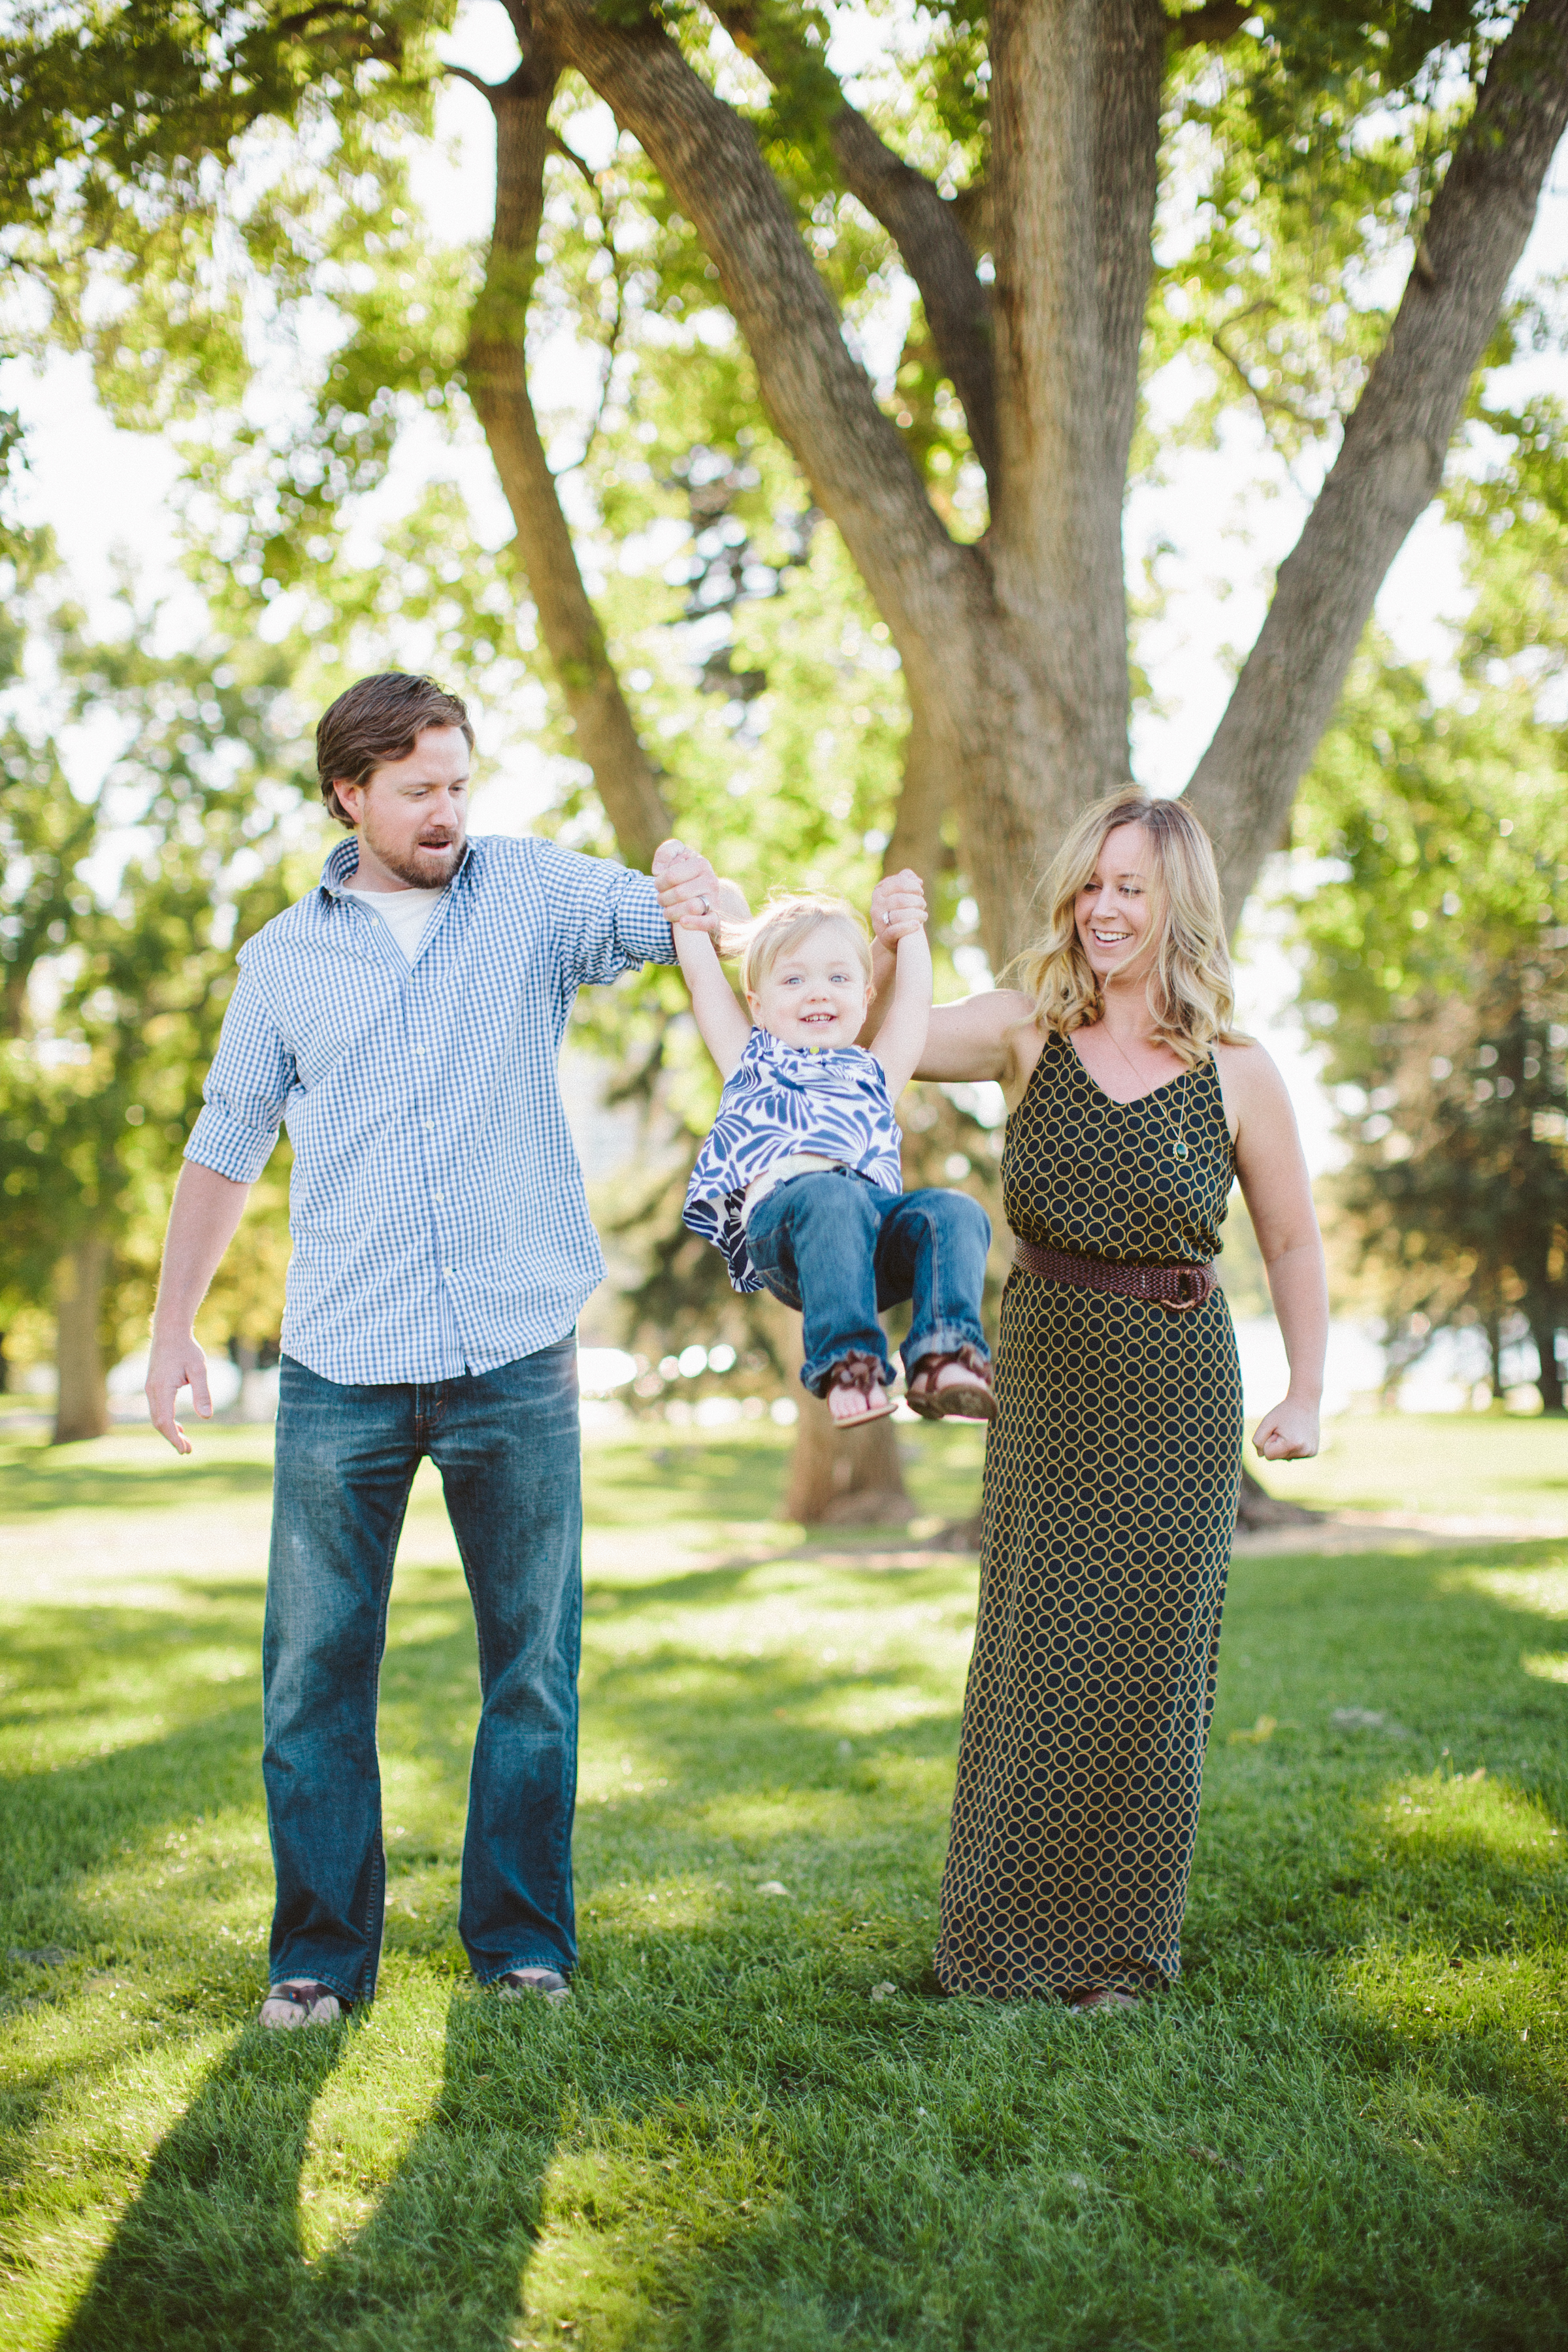 The Triebel Family – Denver Family Photography